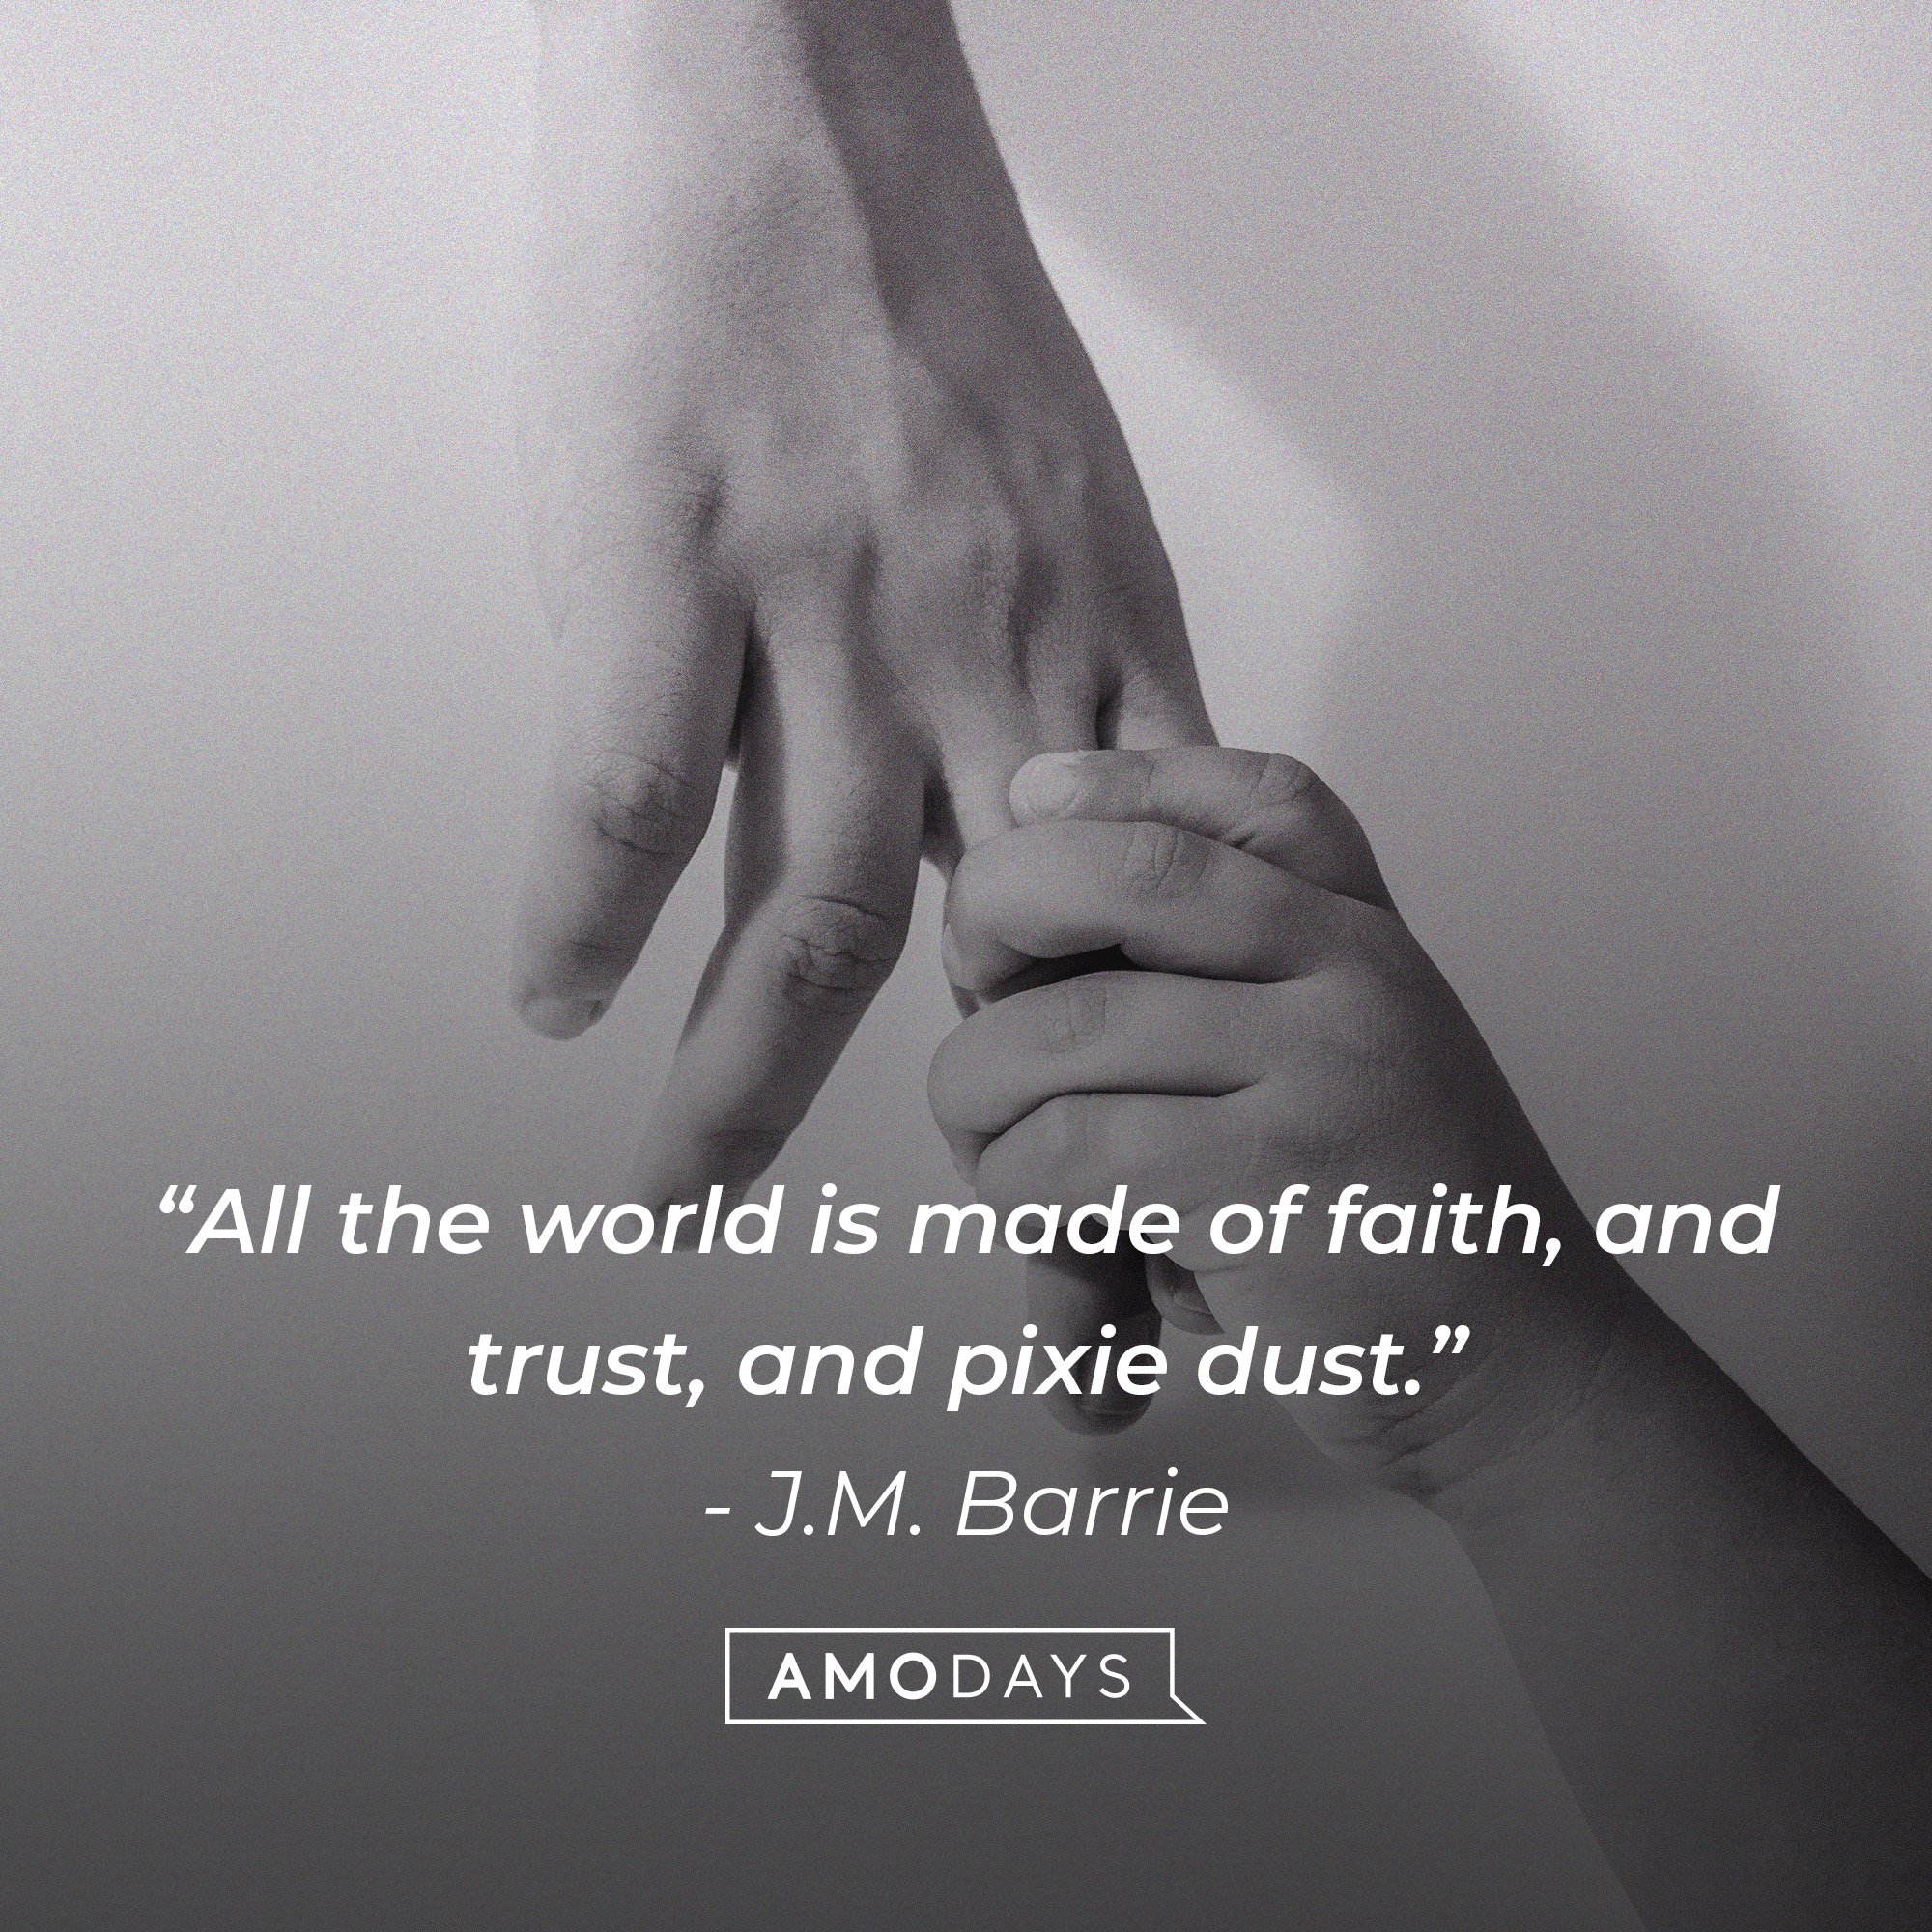 J.M. Barrie’s quote: “All the world is made of faith, and trust, and pixie dust.” | Image: AmoDays